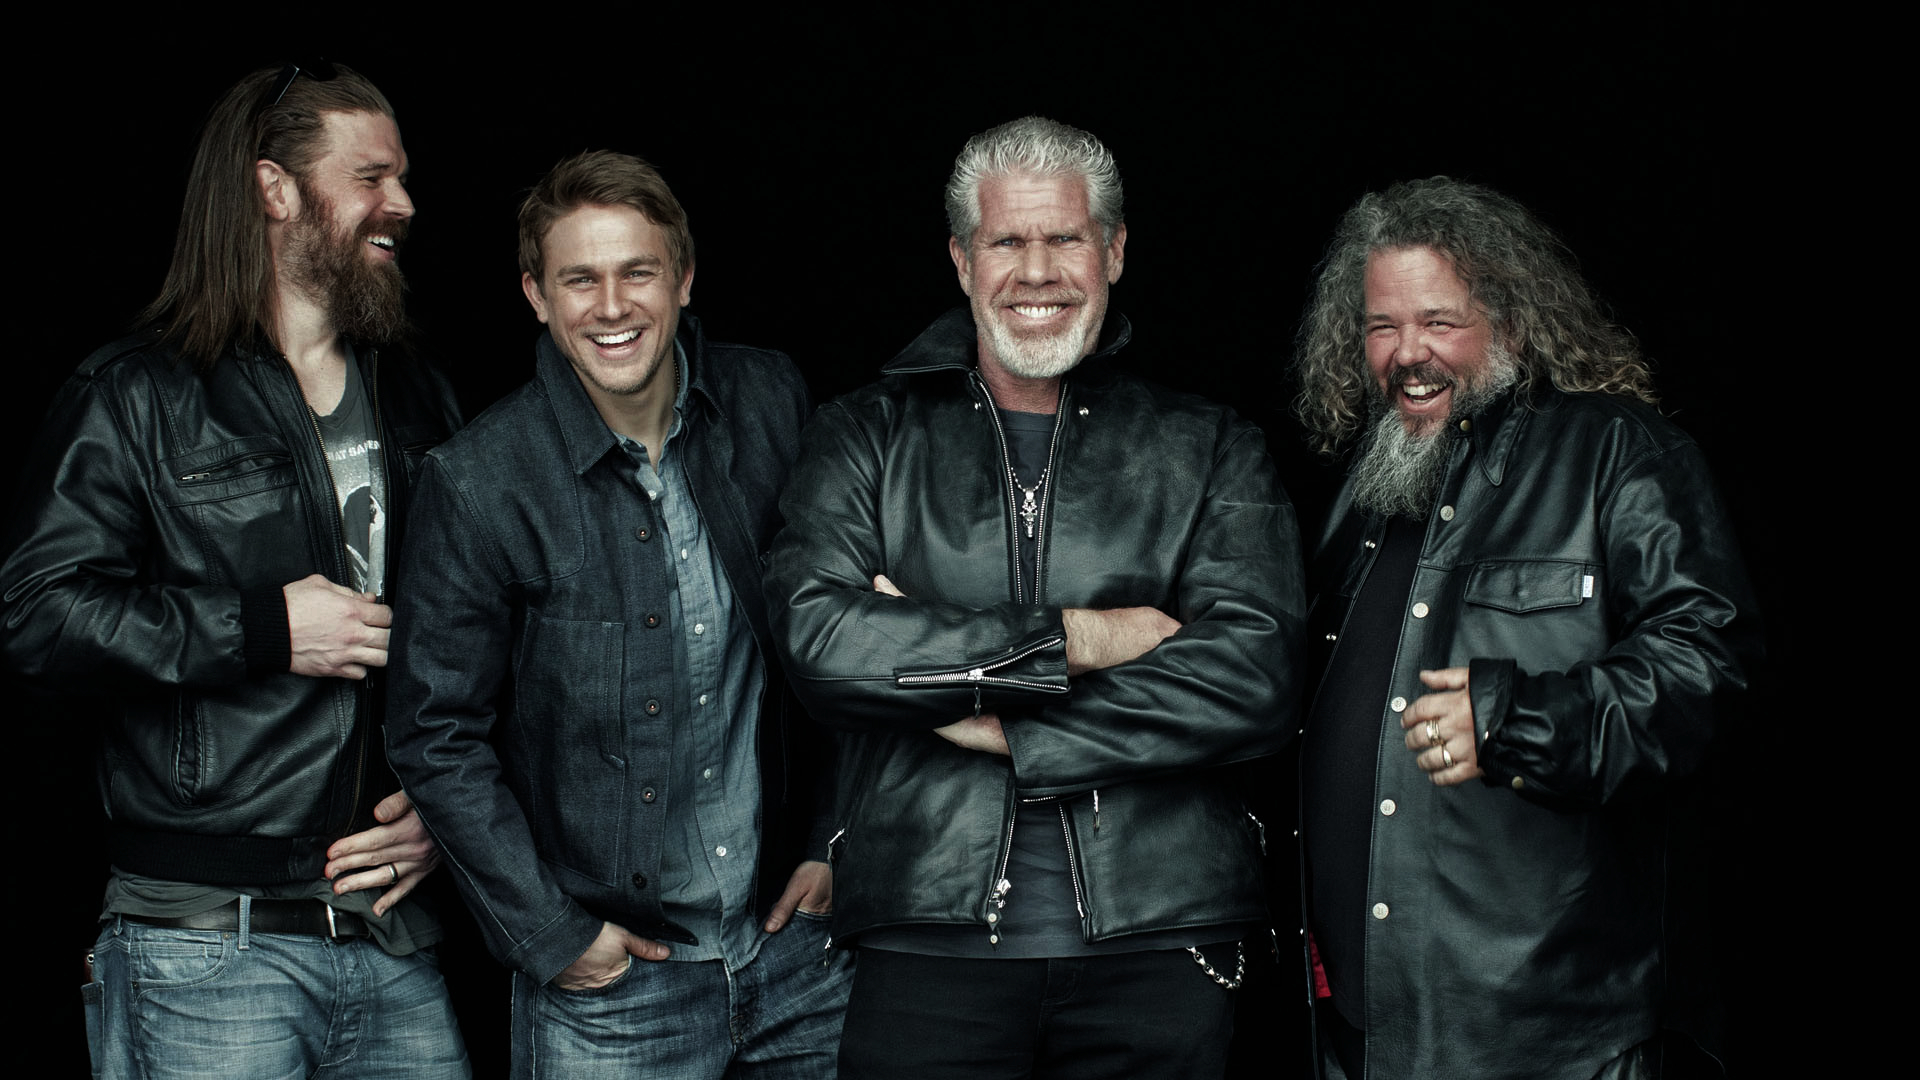 Sons Of Anarchy Hd Wallpaper Background Image 1920x1080